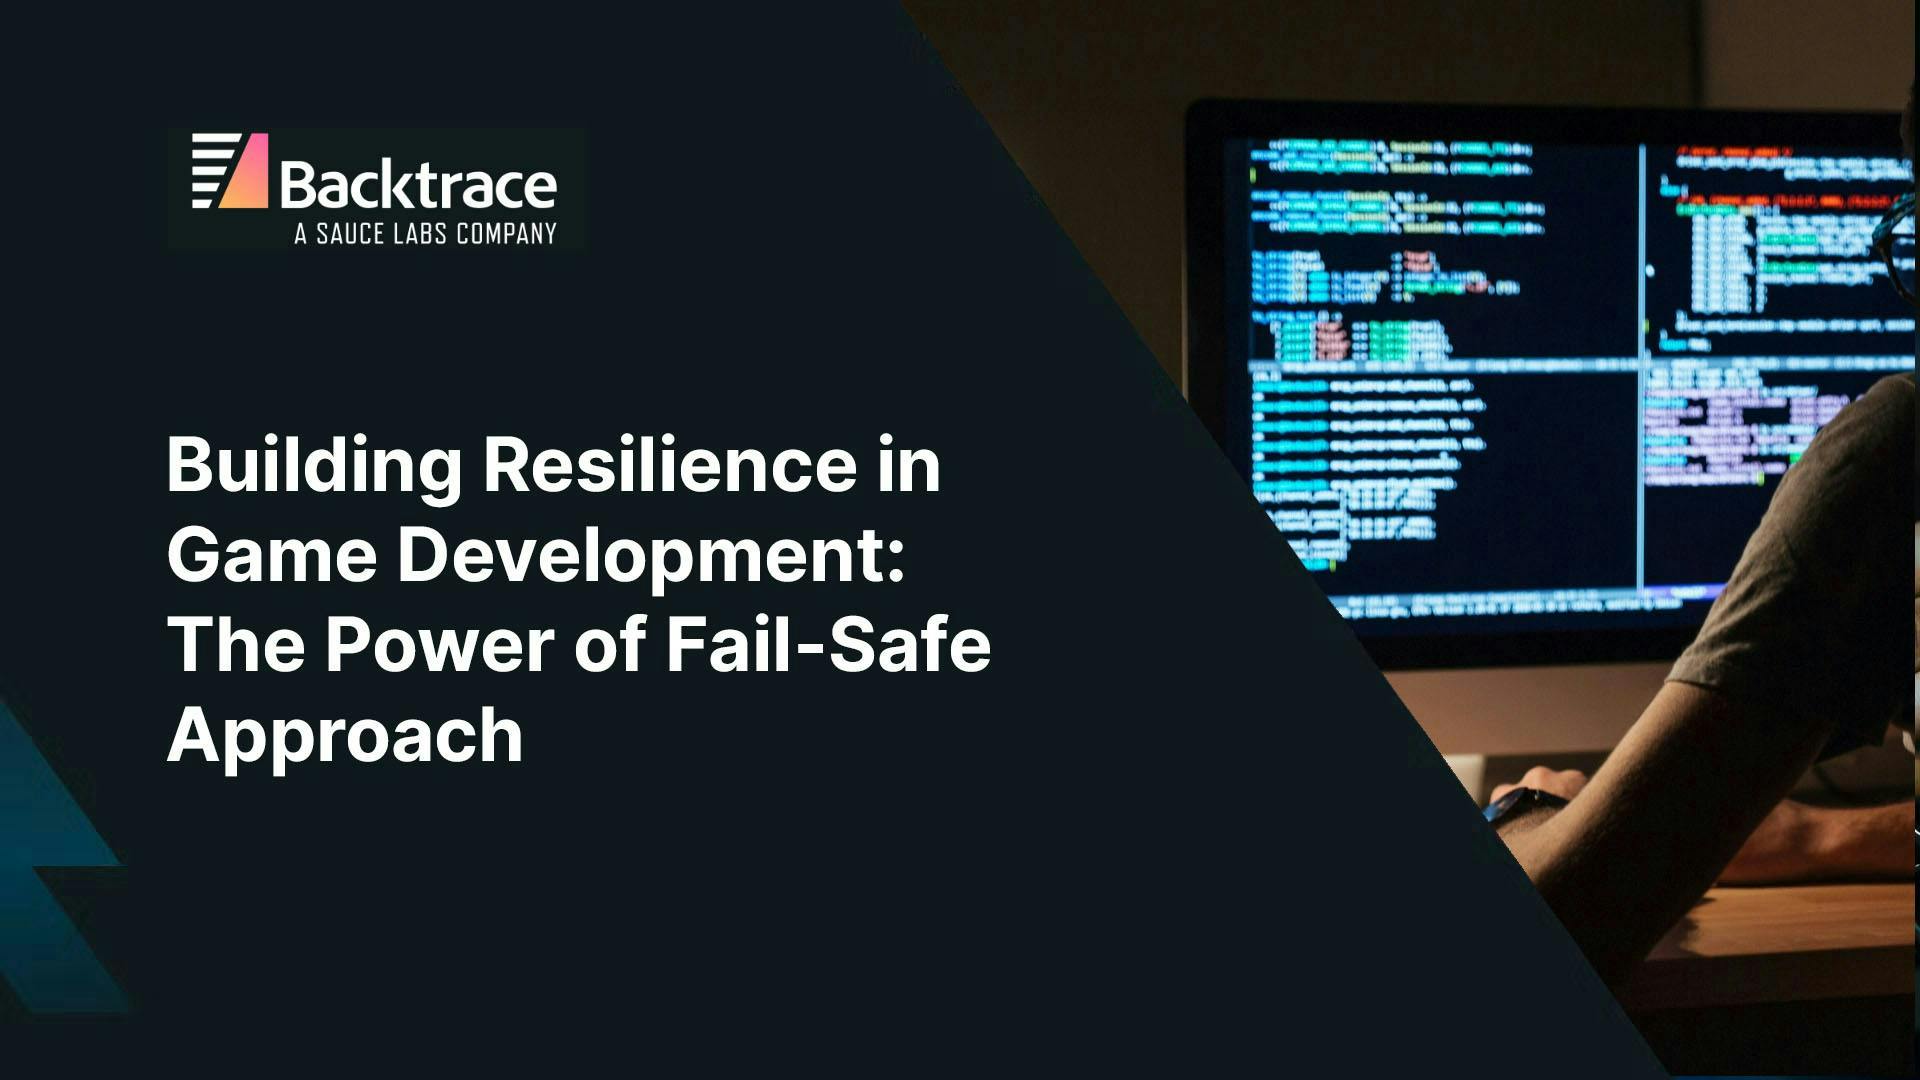 Thumbnail image for blog post: Building Resilience in Game Development: The Power of Fail-Safe Approach